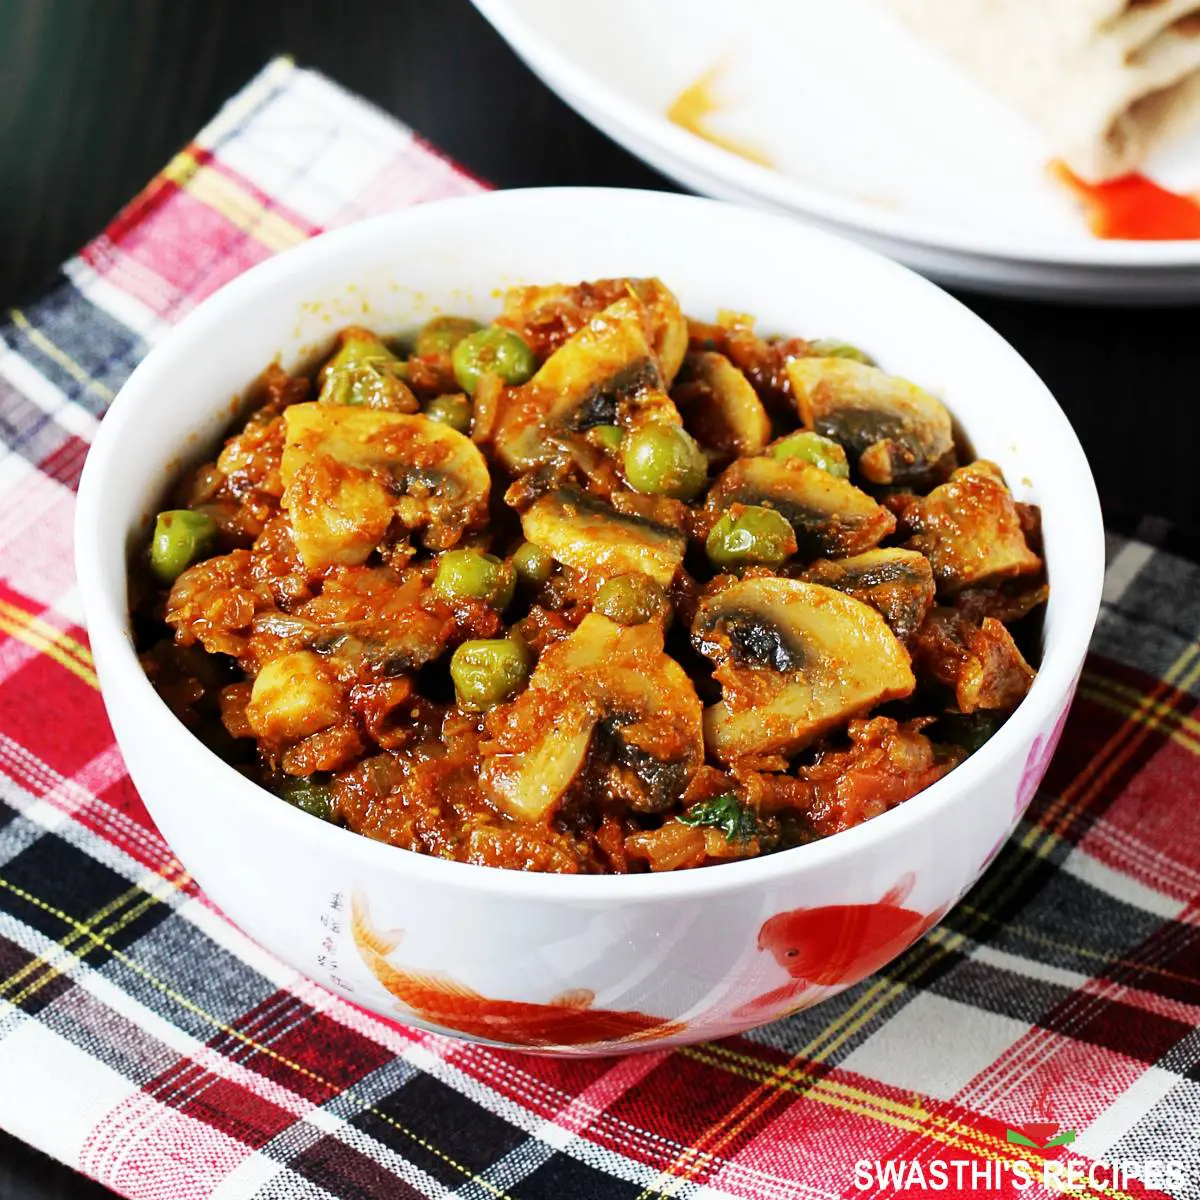 Matar Mushroom is mushrooms and peas cooked in a spicy onion tomato masala